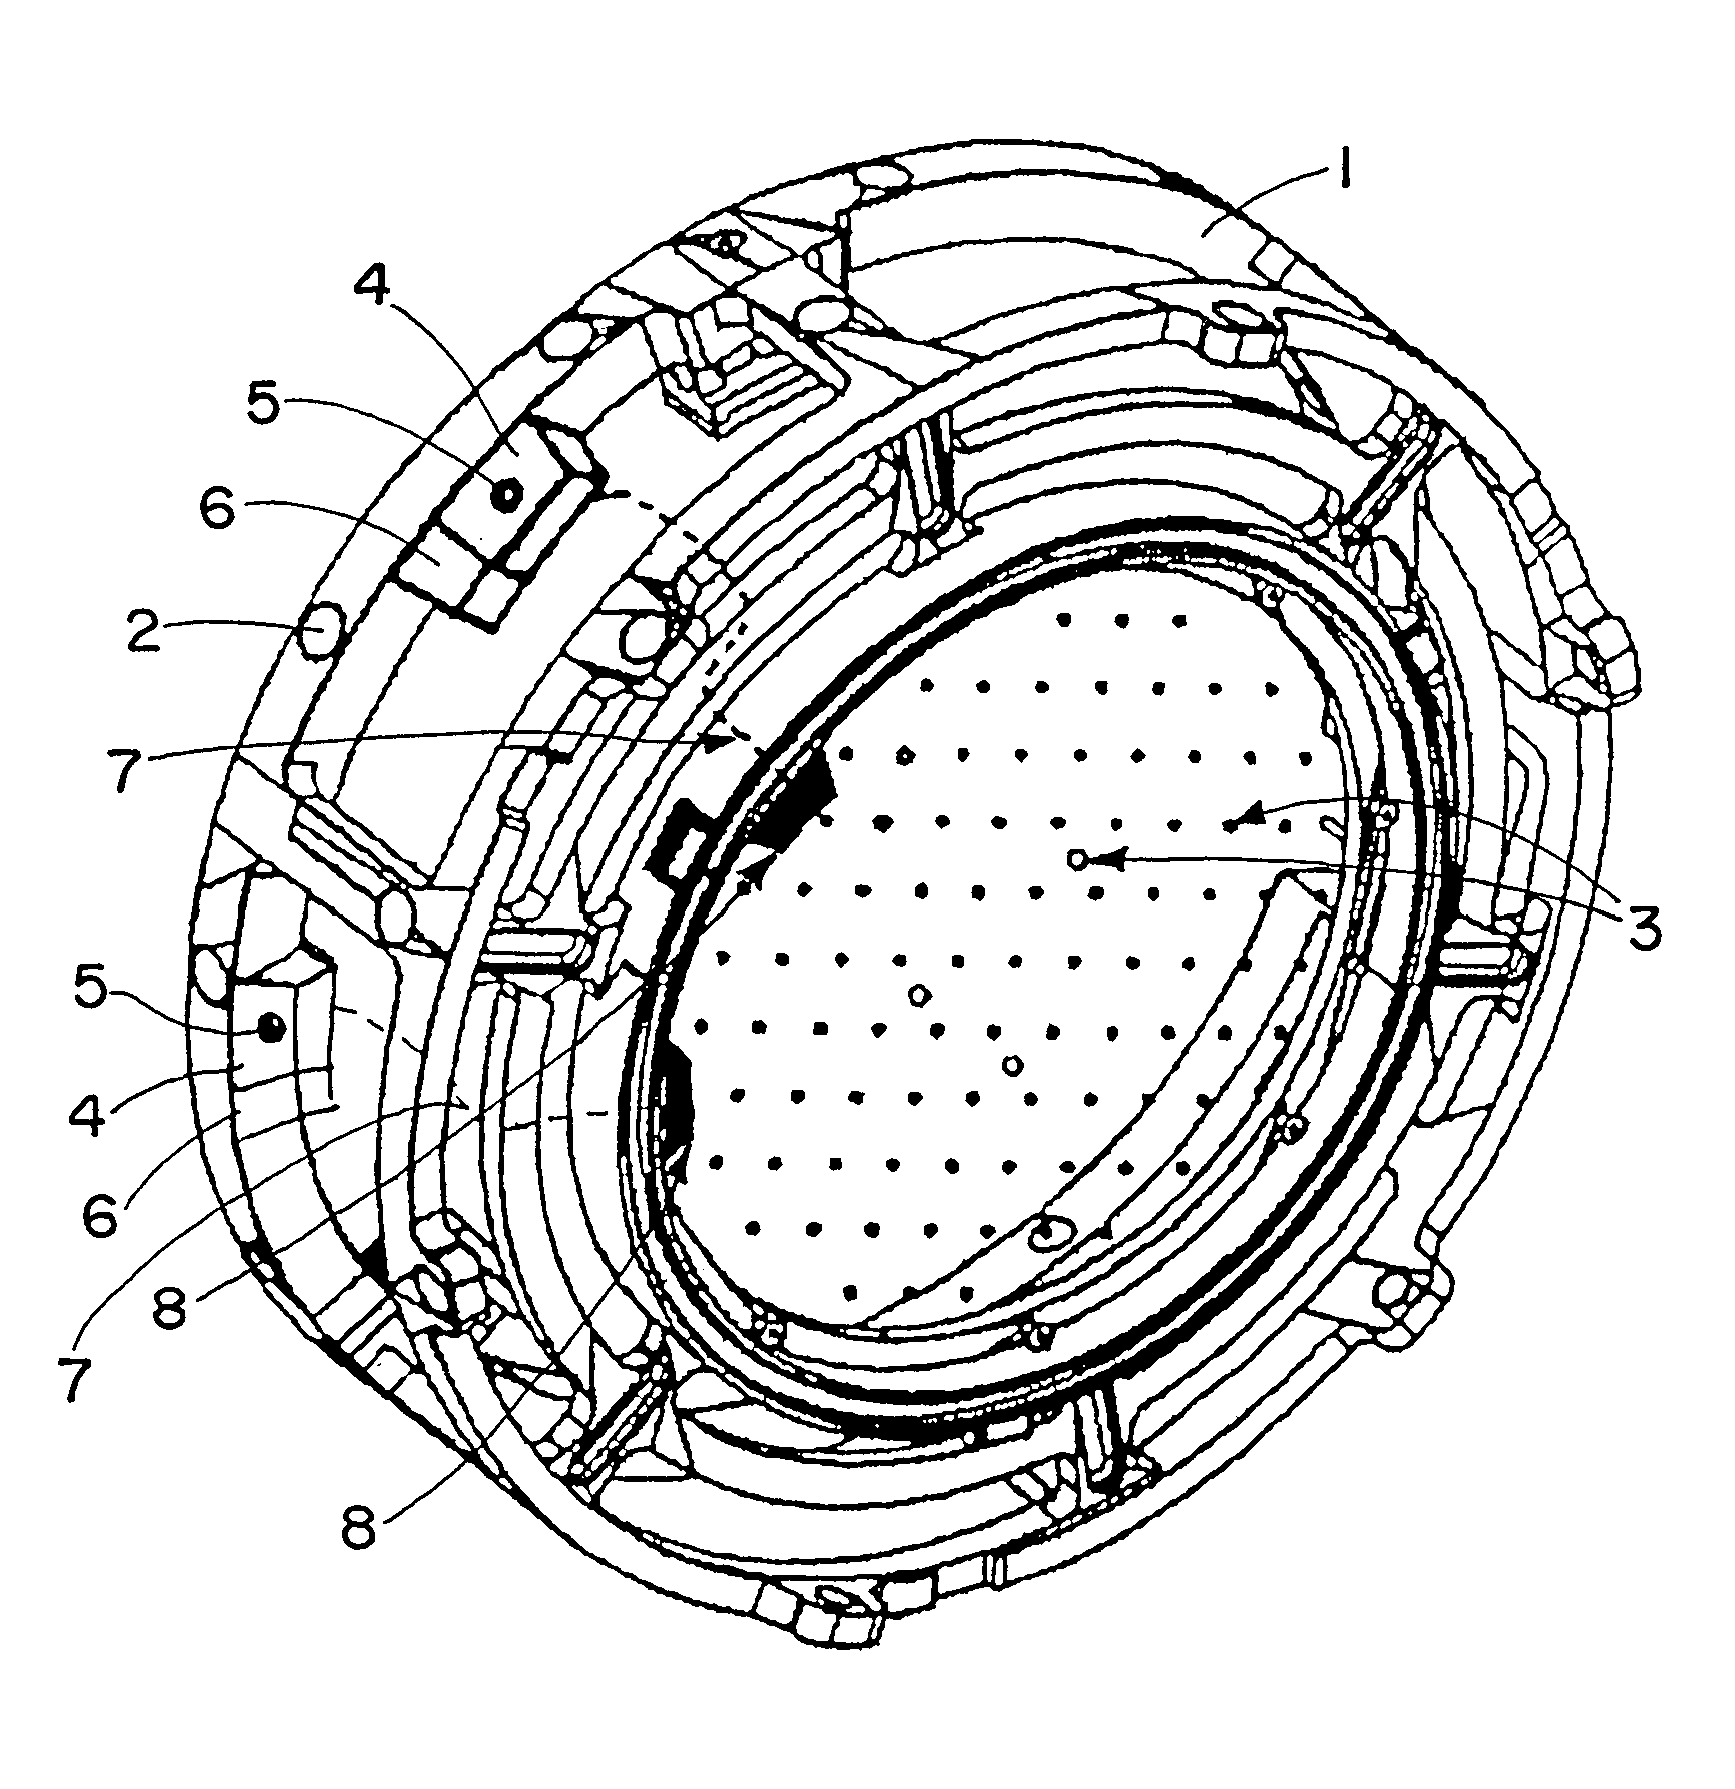 Medical x-ray detection device including an active optical signal emitter